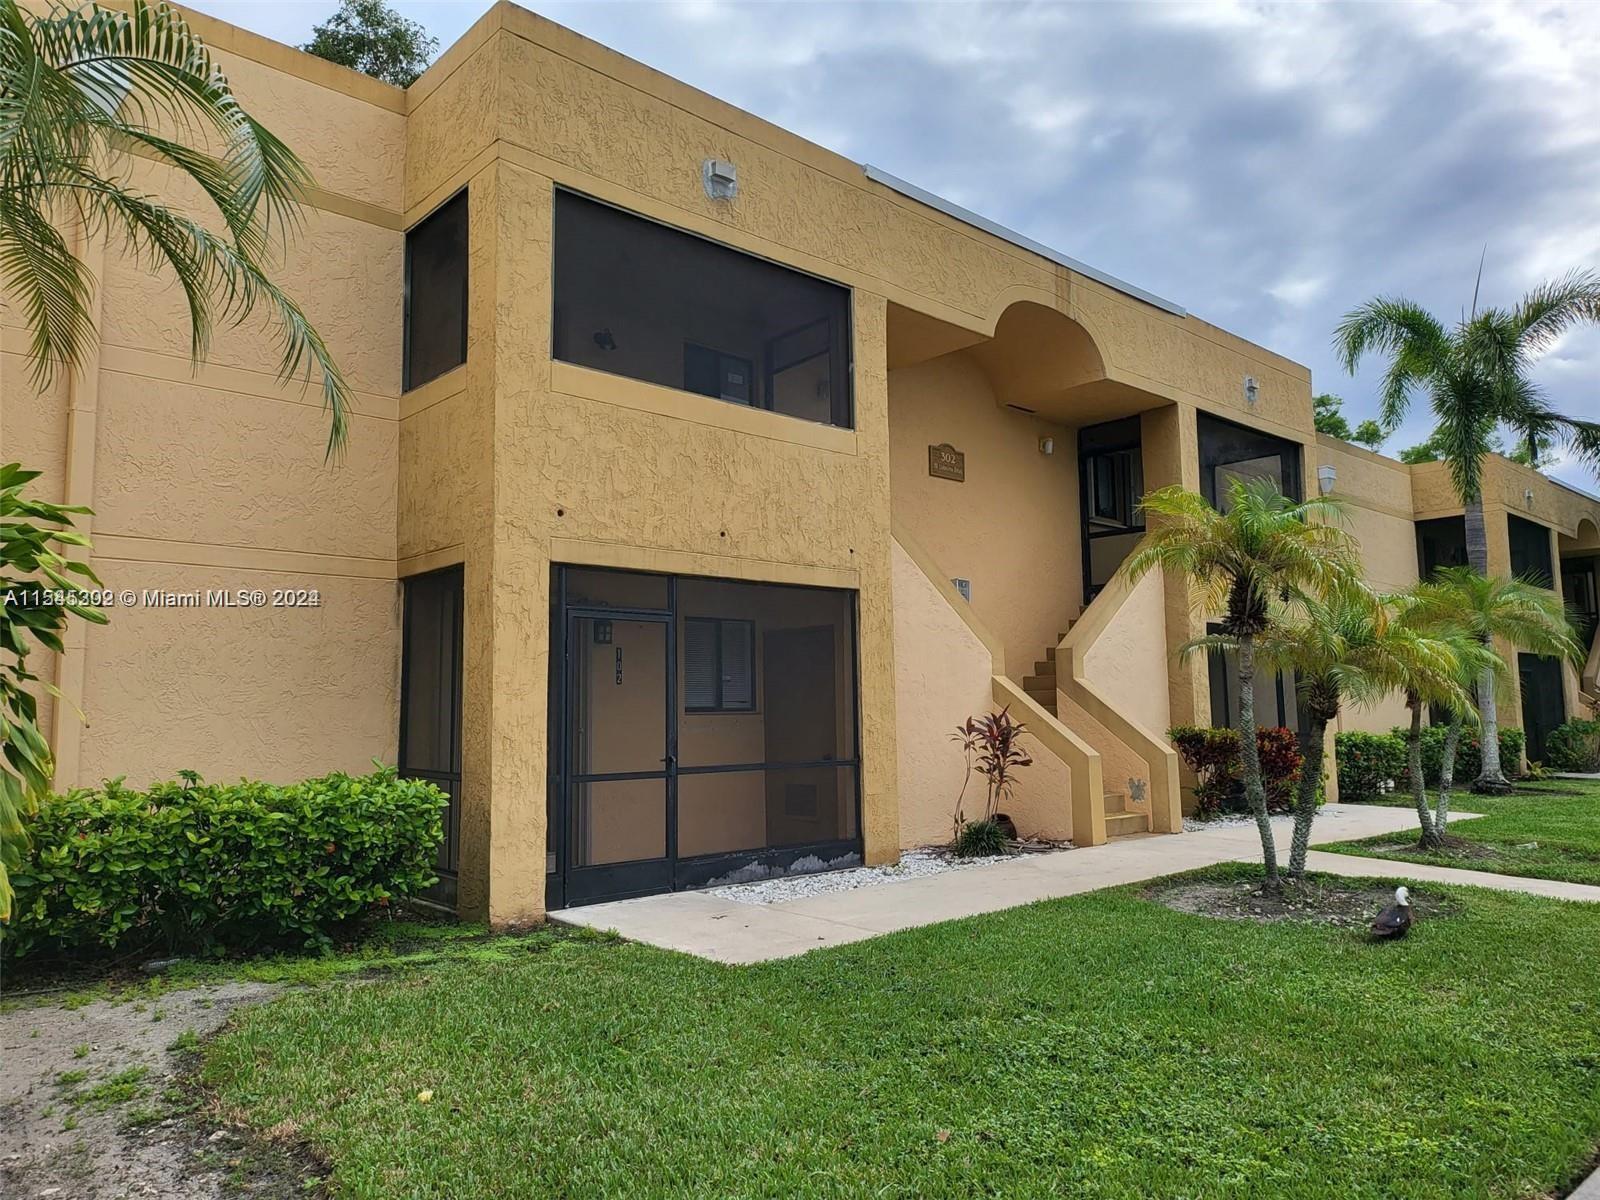 Photo of 151 Lakeview Dr #102 in Weston, FL